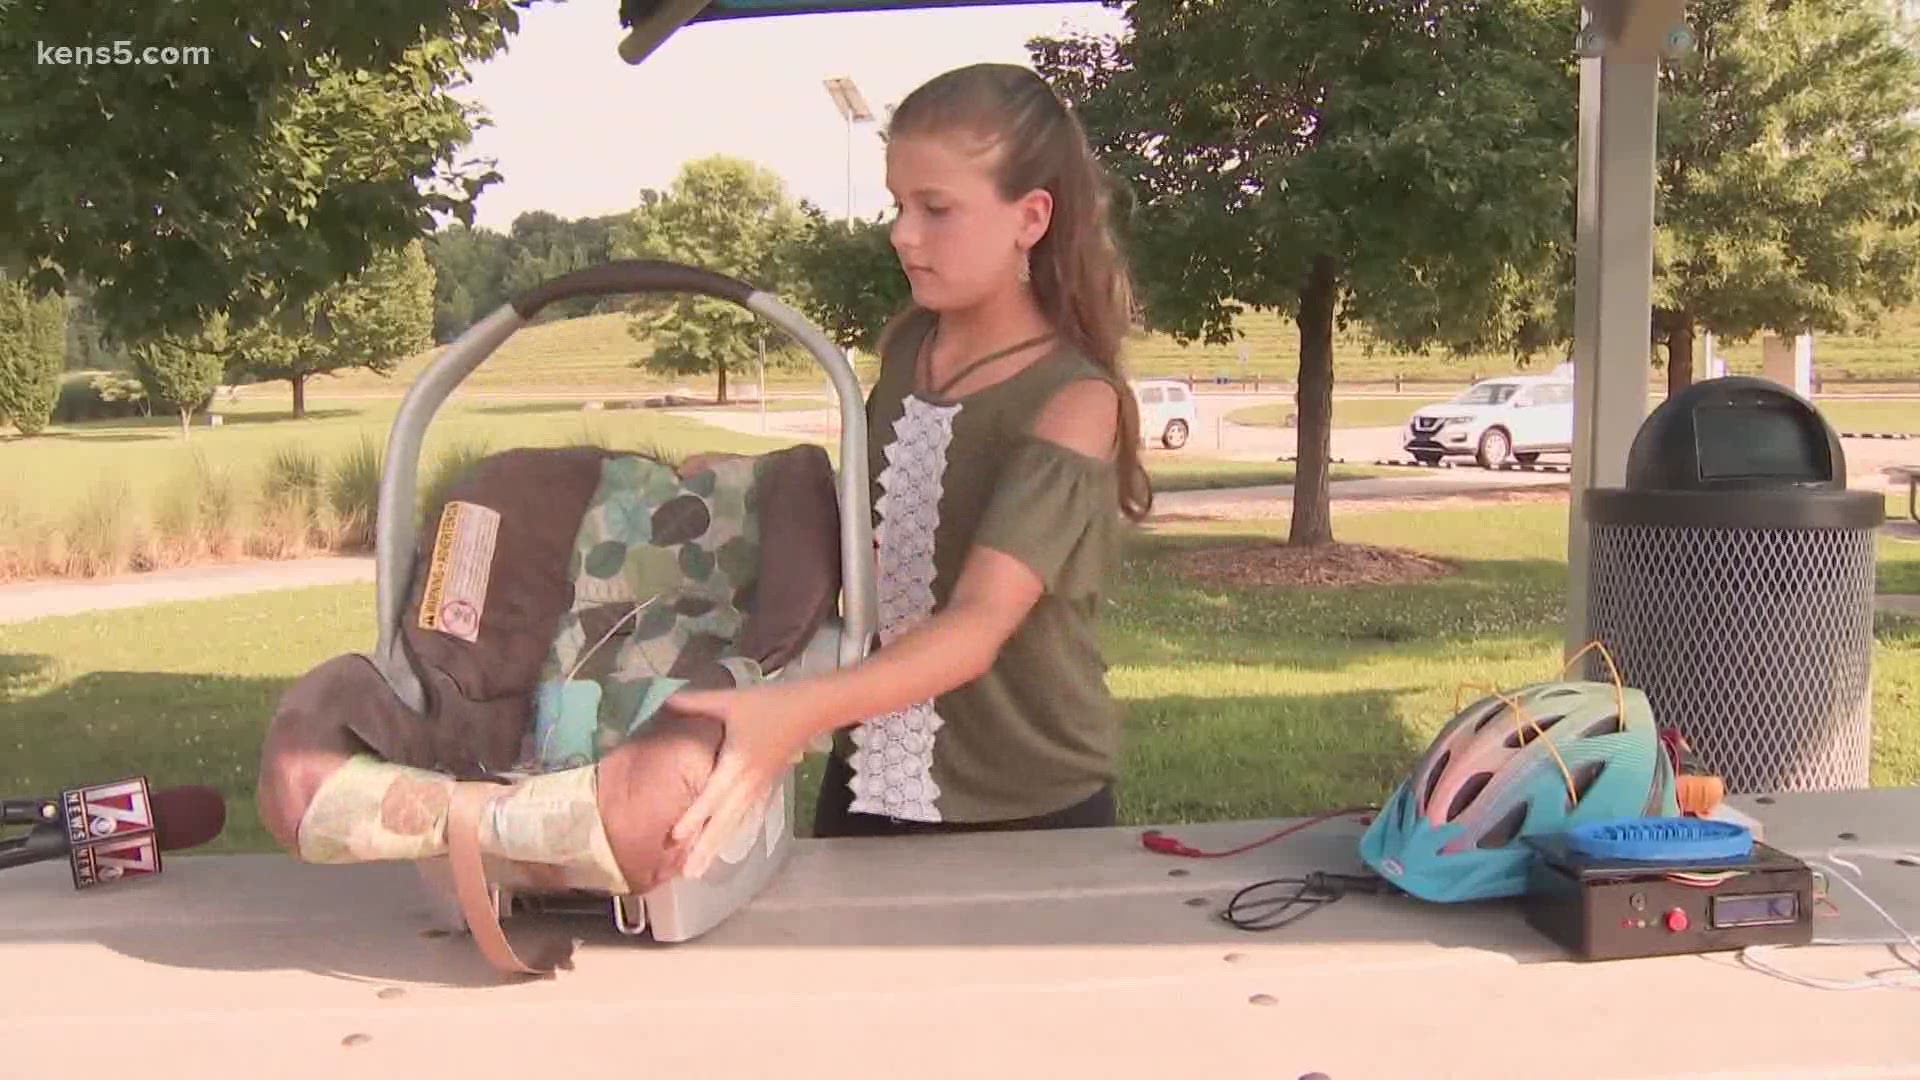 A 12-year-old girl in North Carolina thinks she has found a solution to keeping kids safe in the heat. It's called a Beat the Heat Car Seat.